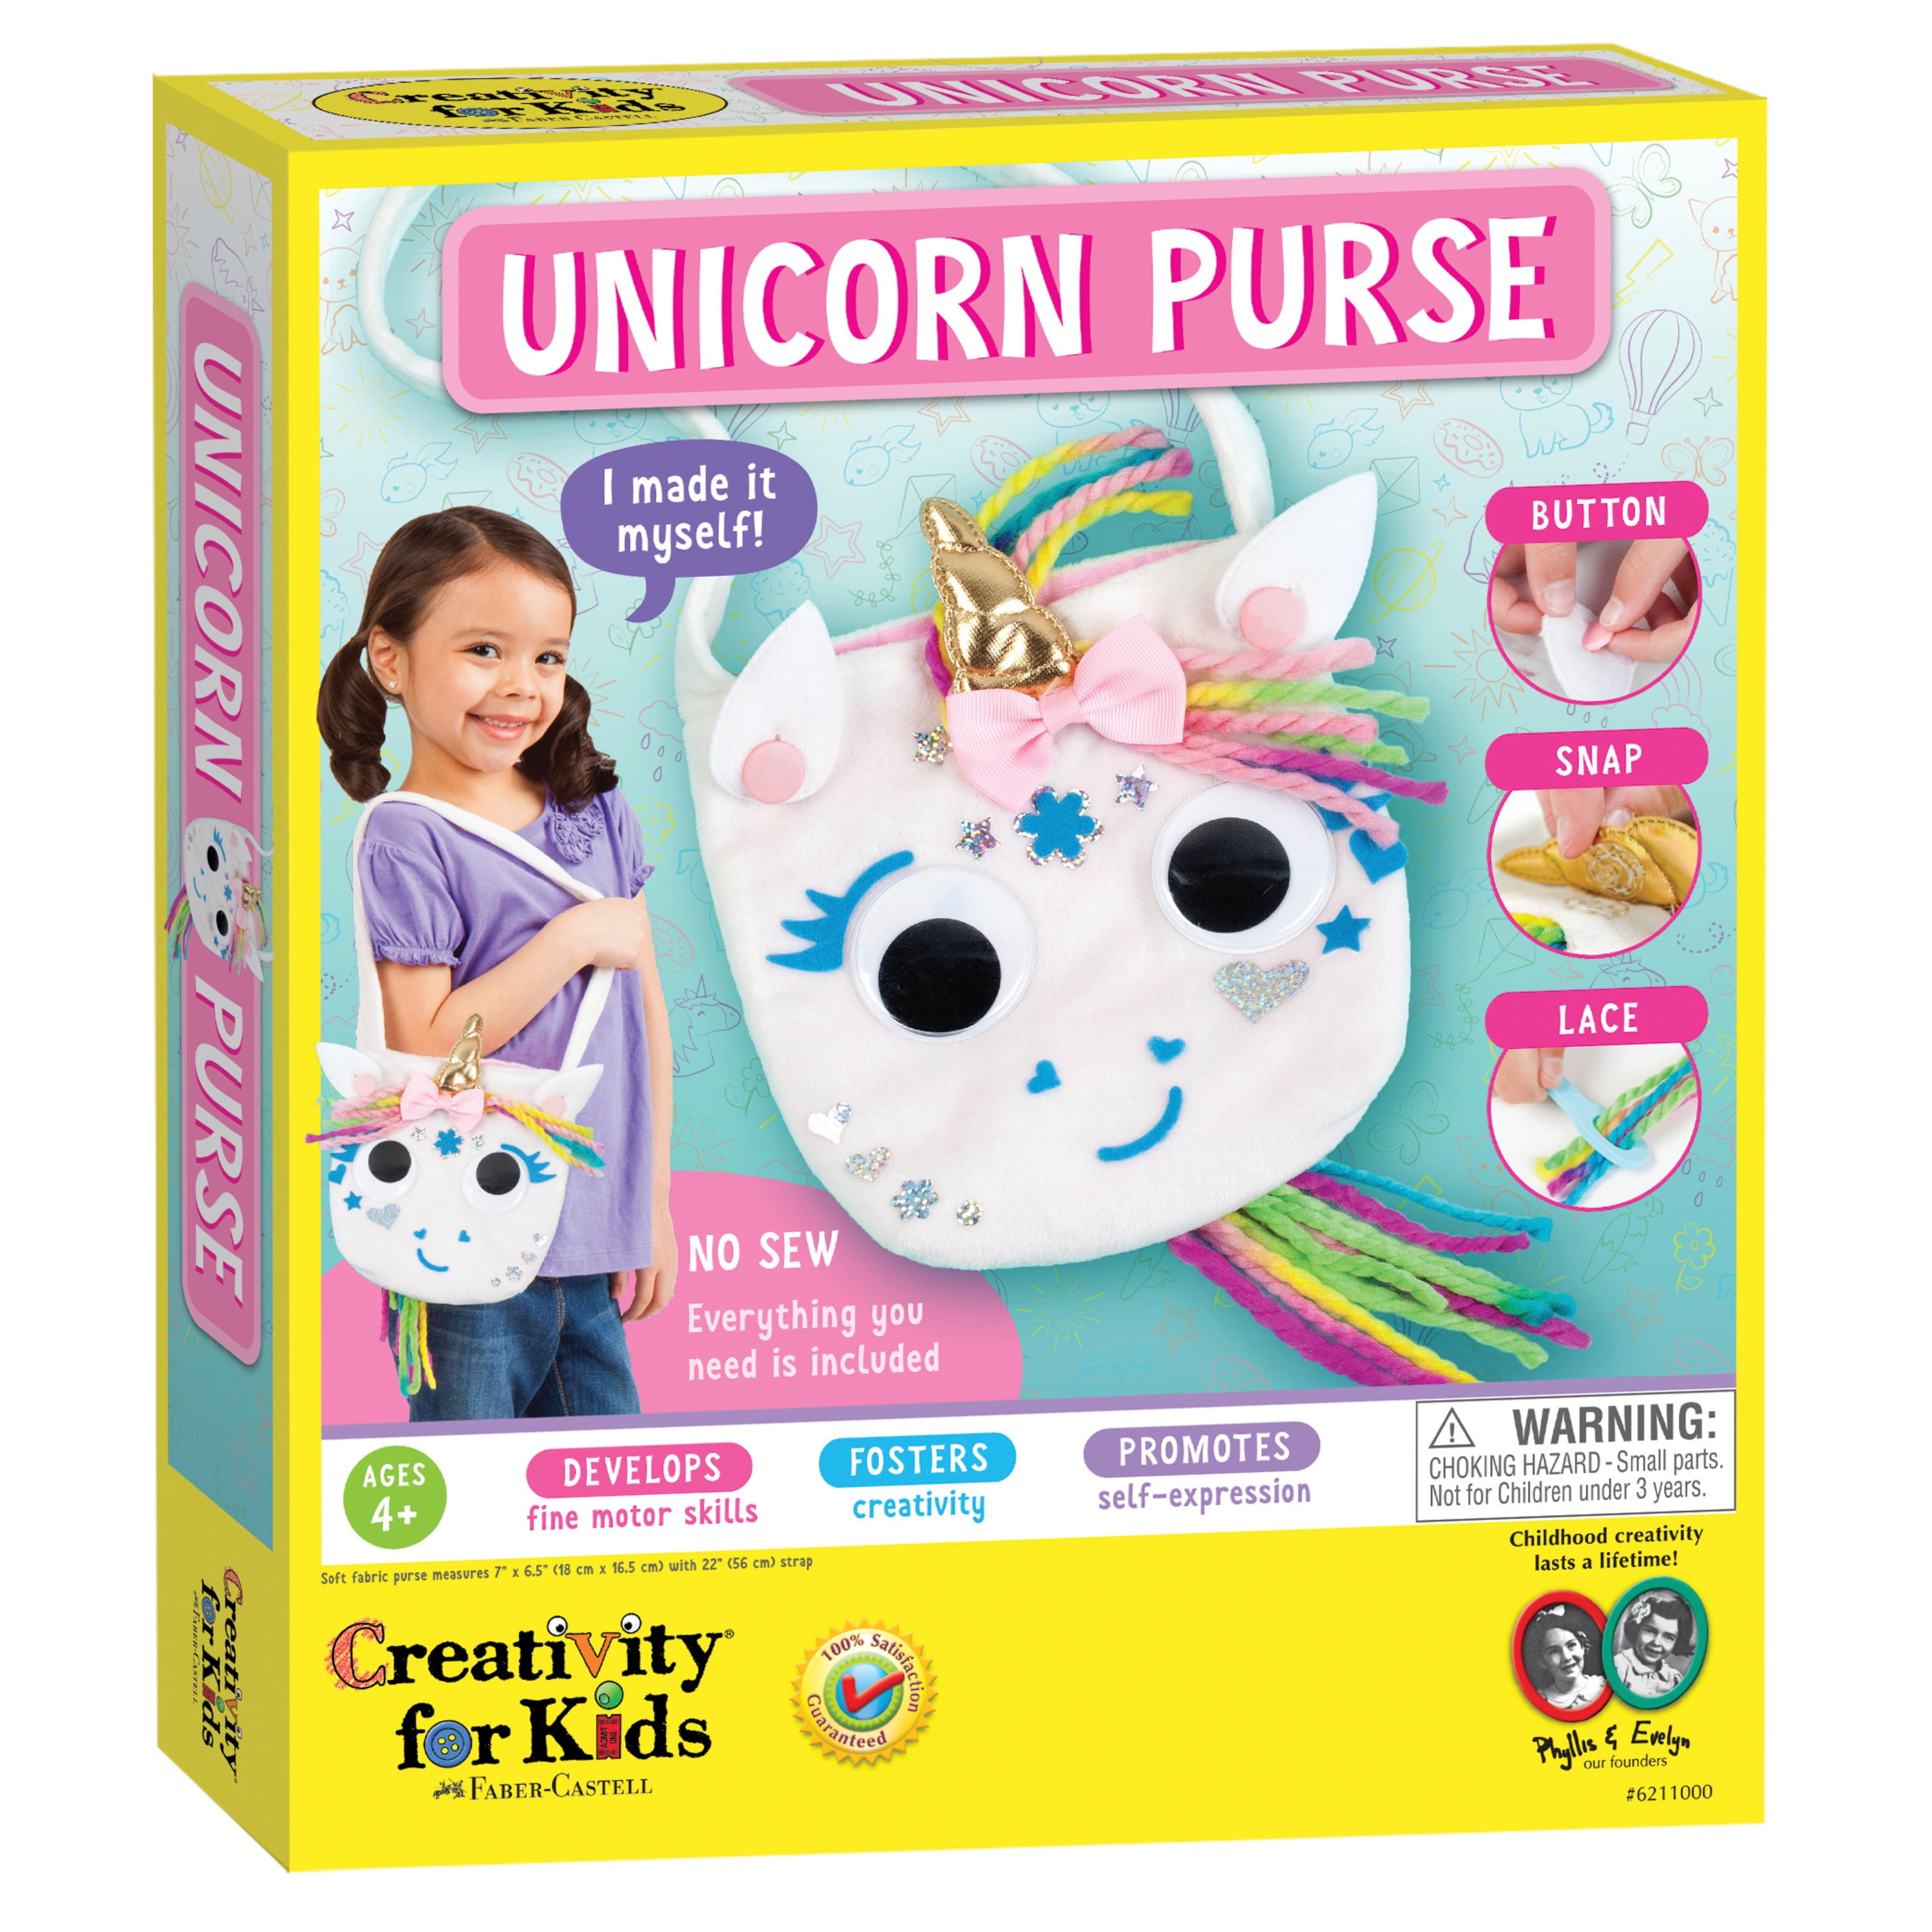  KIDS REPUBLIC, Unicorn Gifts for Girls & Boys Unicorn Toys for  3 Years Old Painting Your own Unicorn : Toys & Games